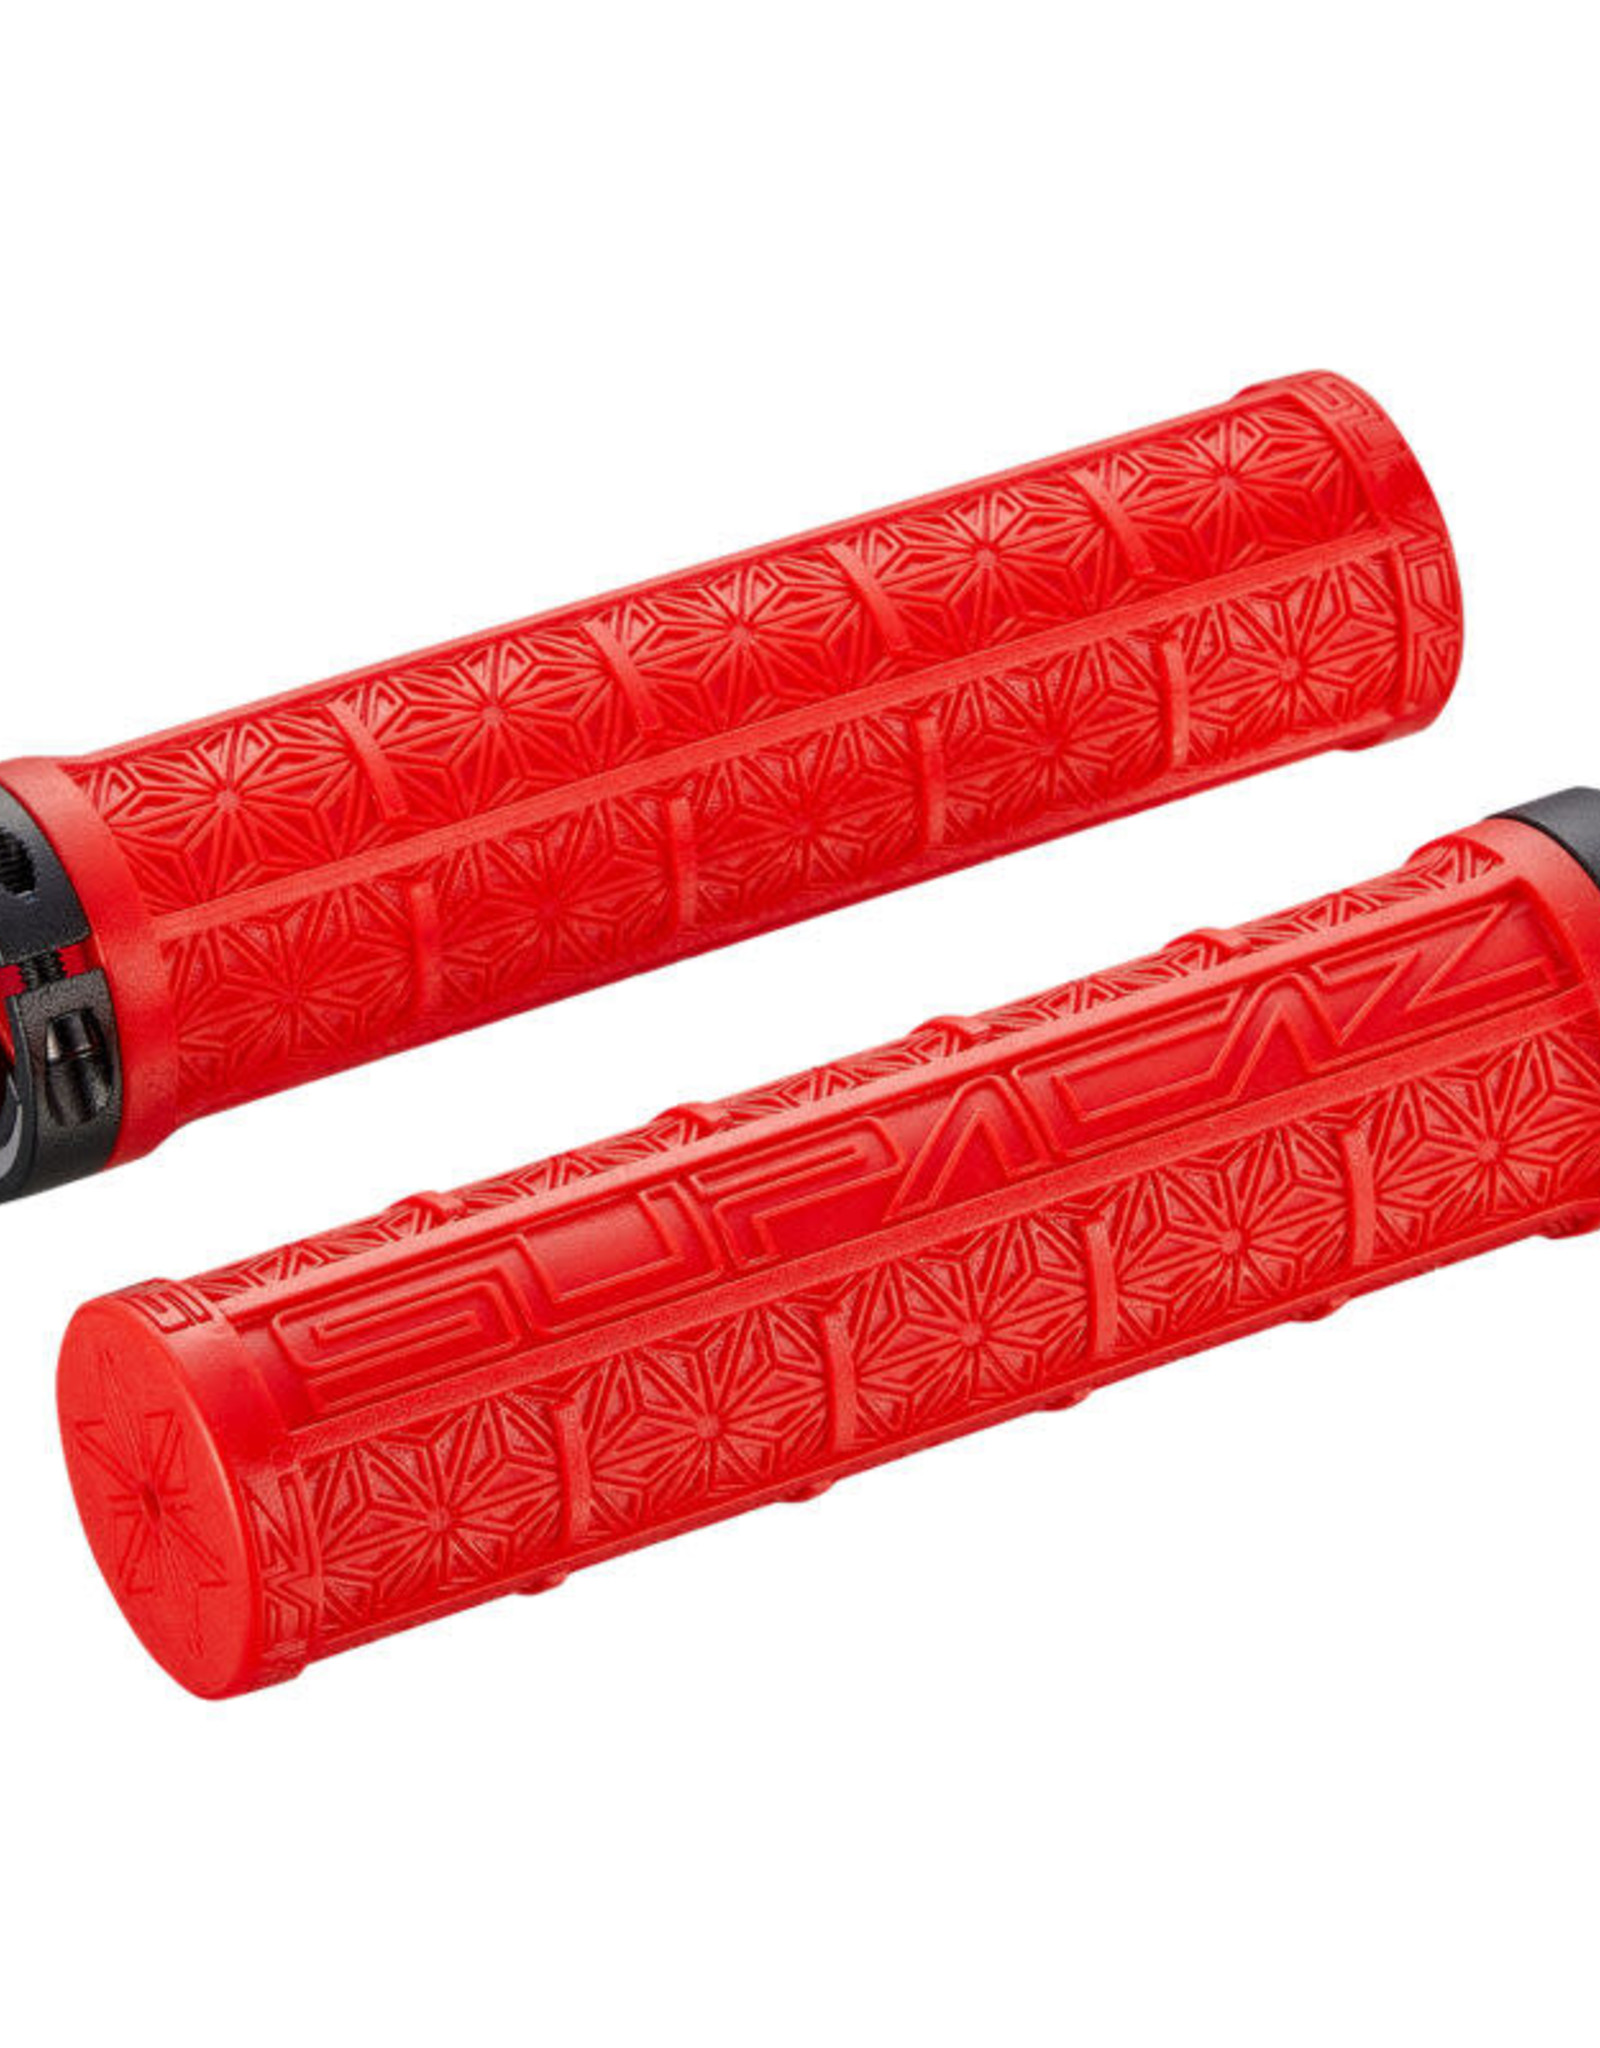 SPECIALIZED SUPACAZ GRIZIPS GRIPS RED